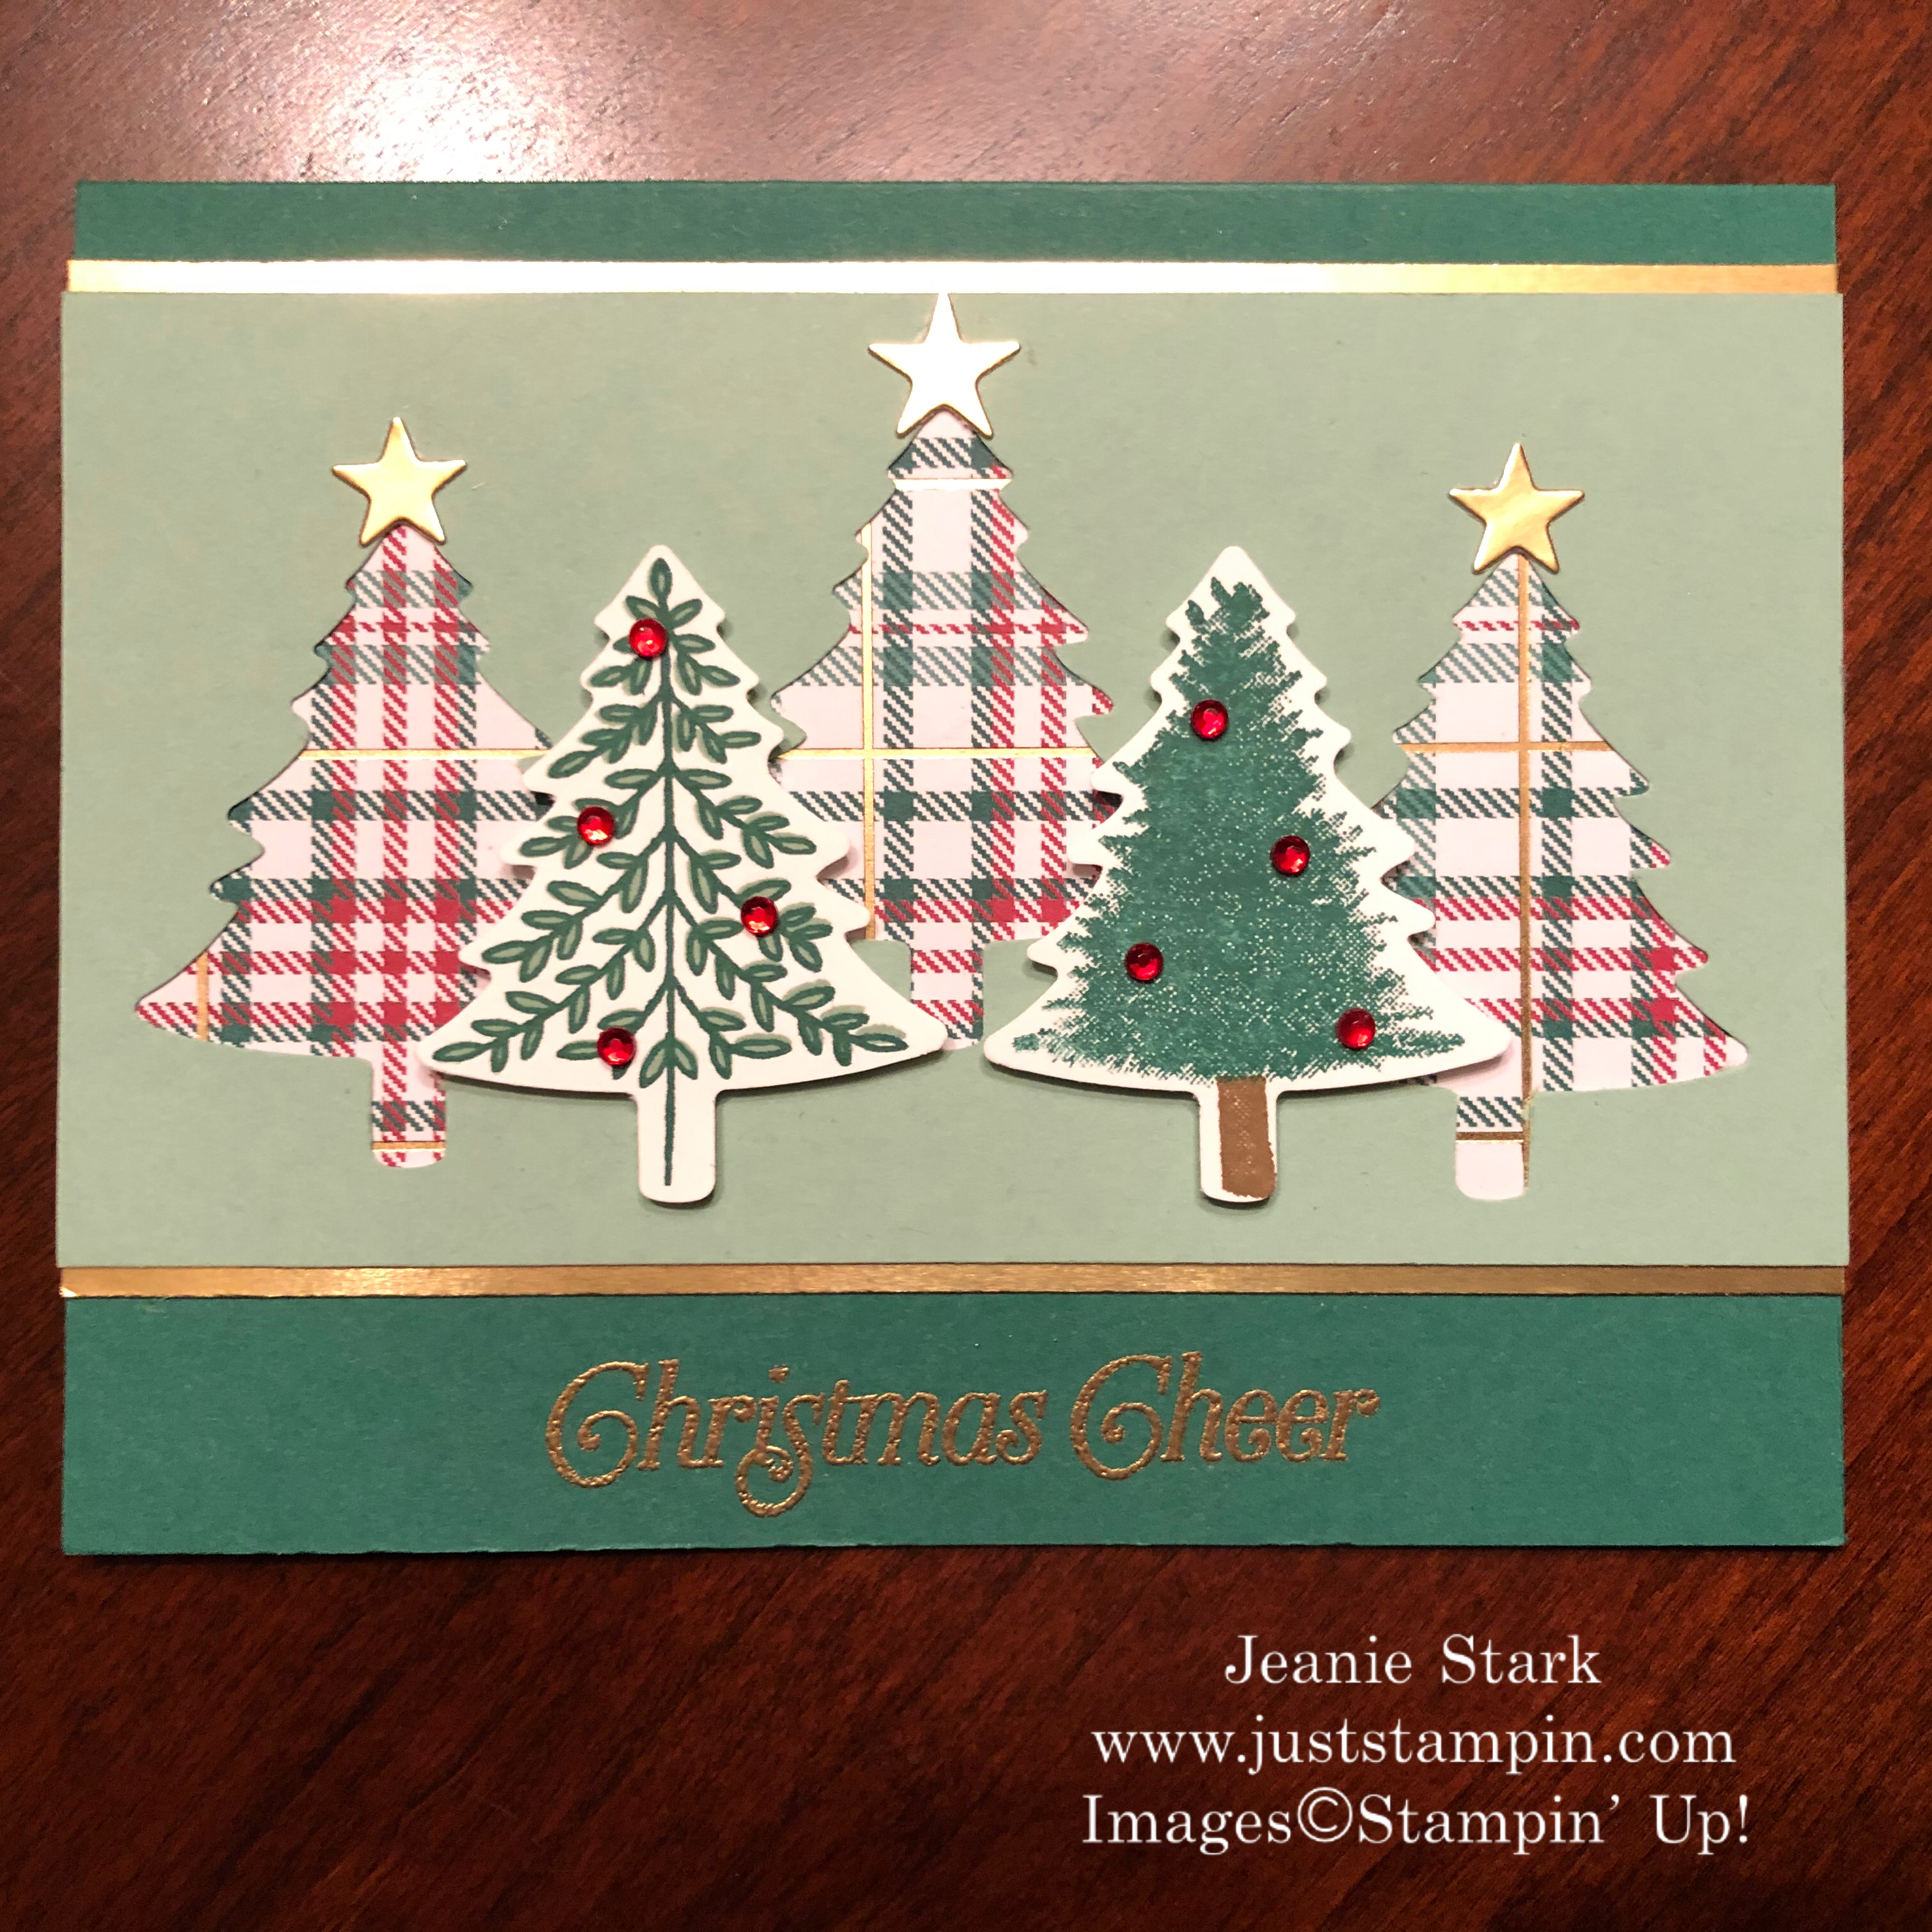 Stampin' Up! Perfectly Plaid stamp set and Pine Tree Punch Christmas card idea - Jeanie Stark StampinUp